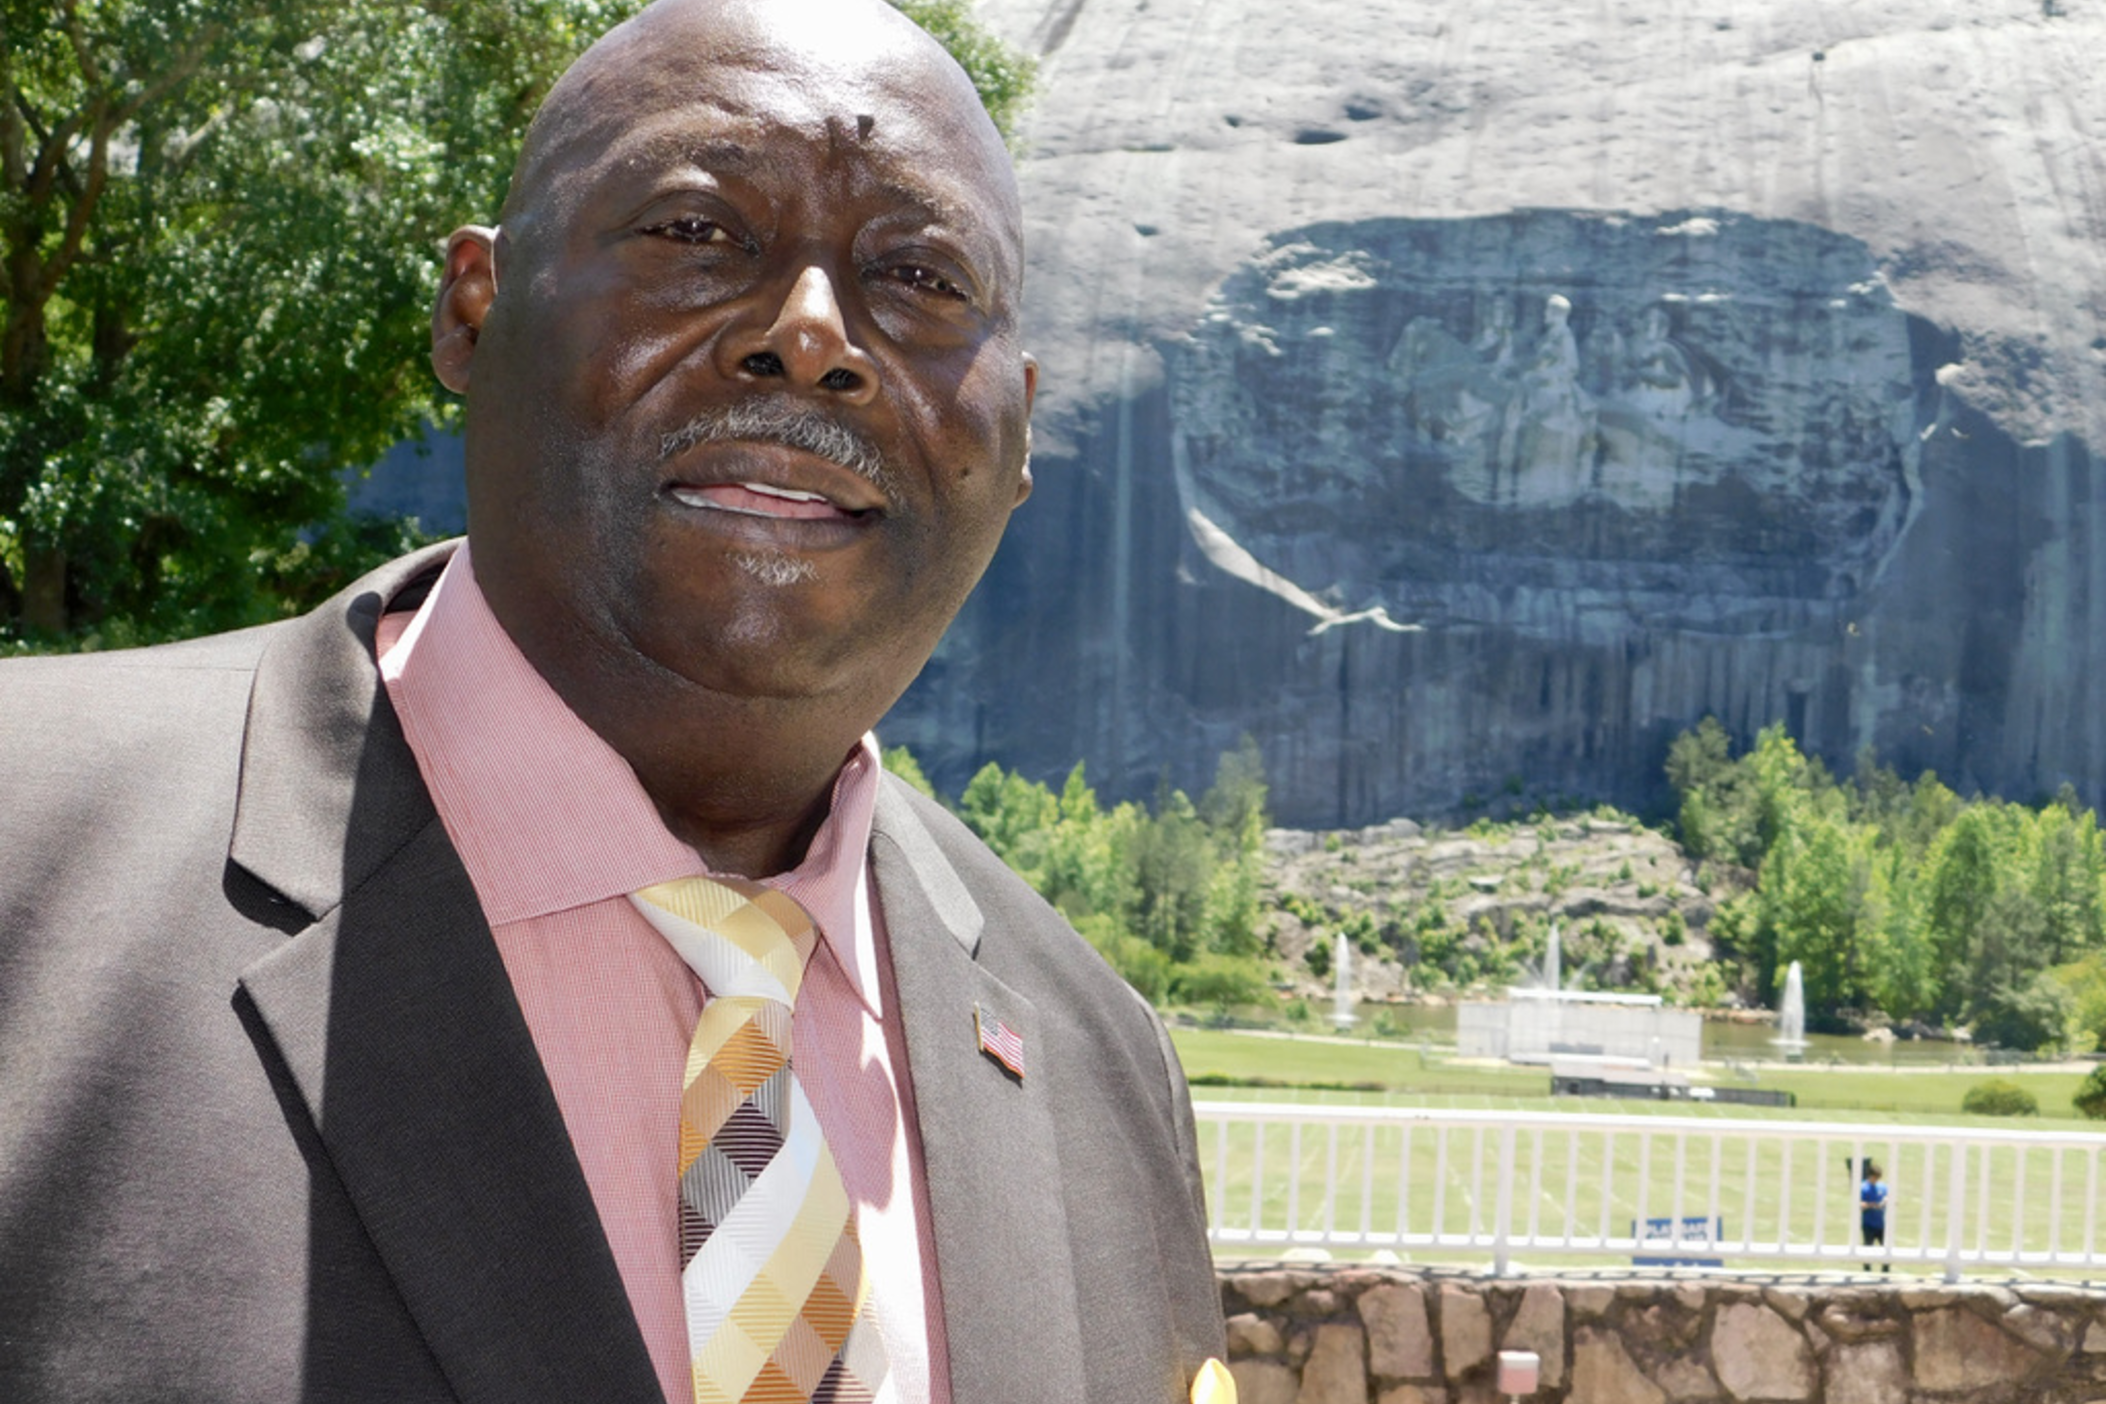 Last month, Gov. Brian Kemp made history when he appointed the pastor of Mount Pleasant Baptist Church in Athens to chair the Stone Mountain Memorial Association.